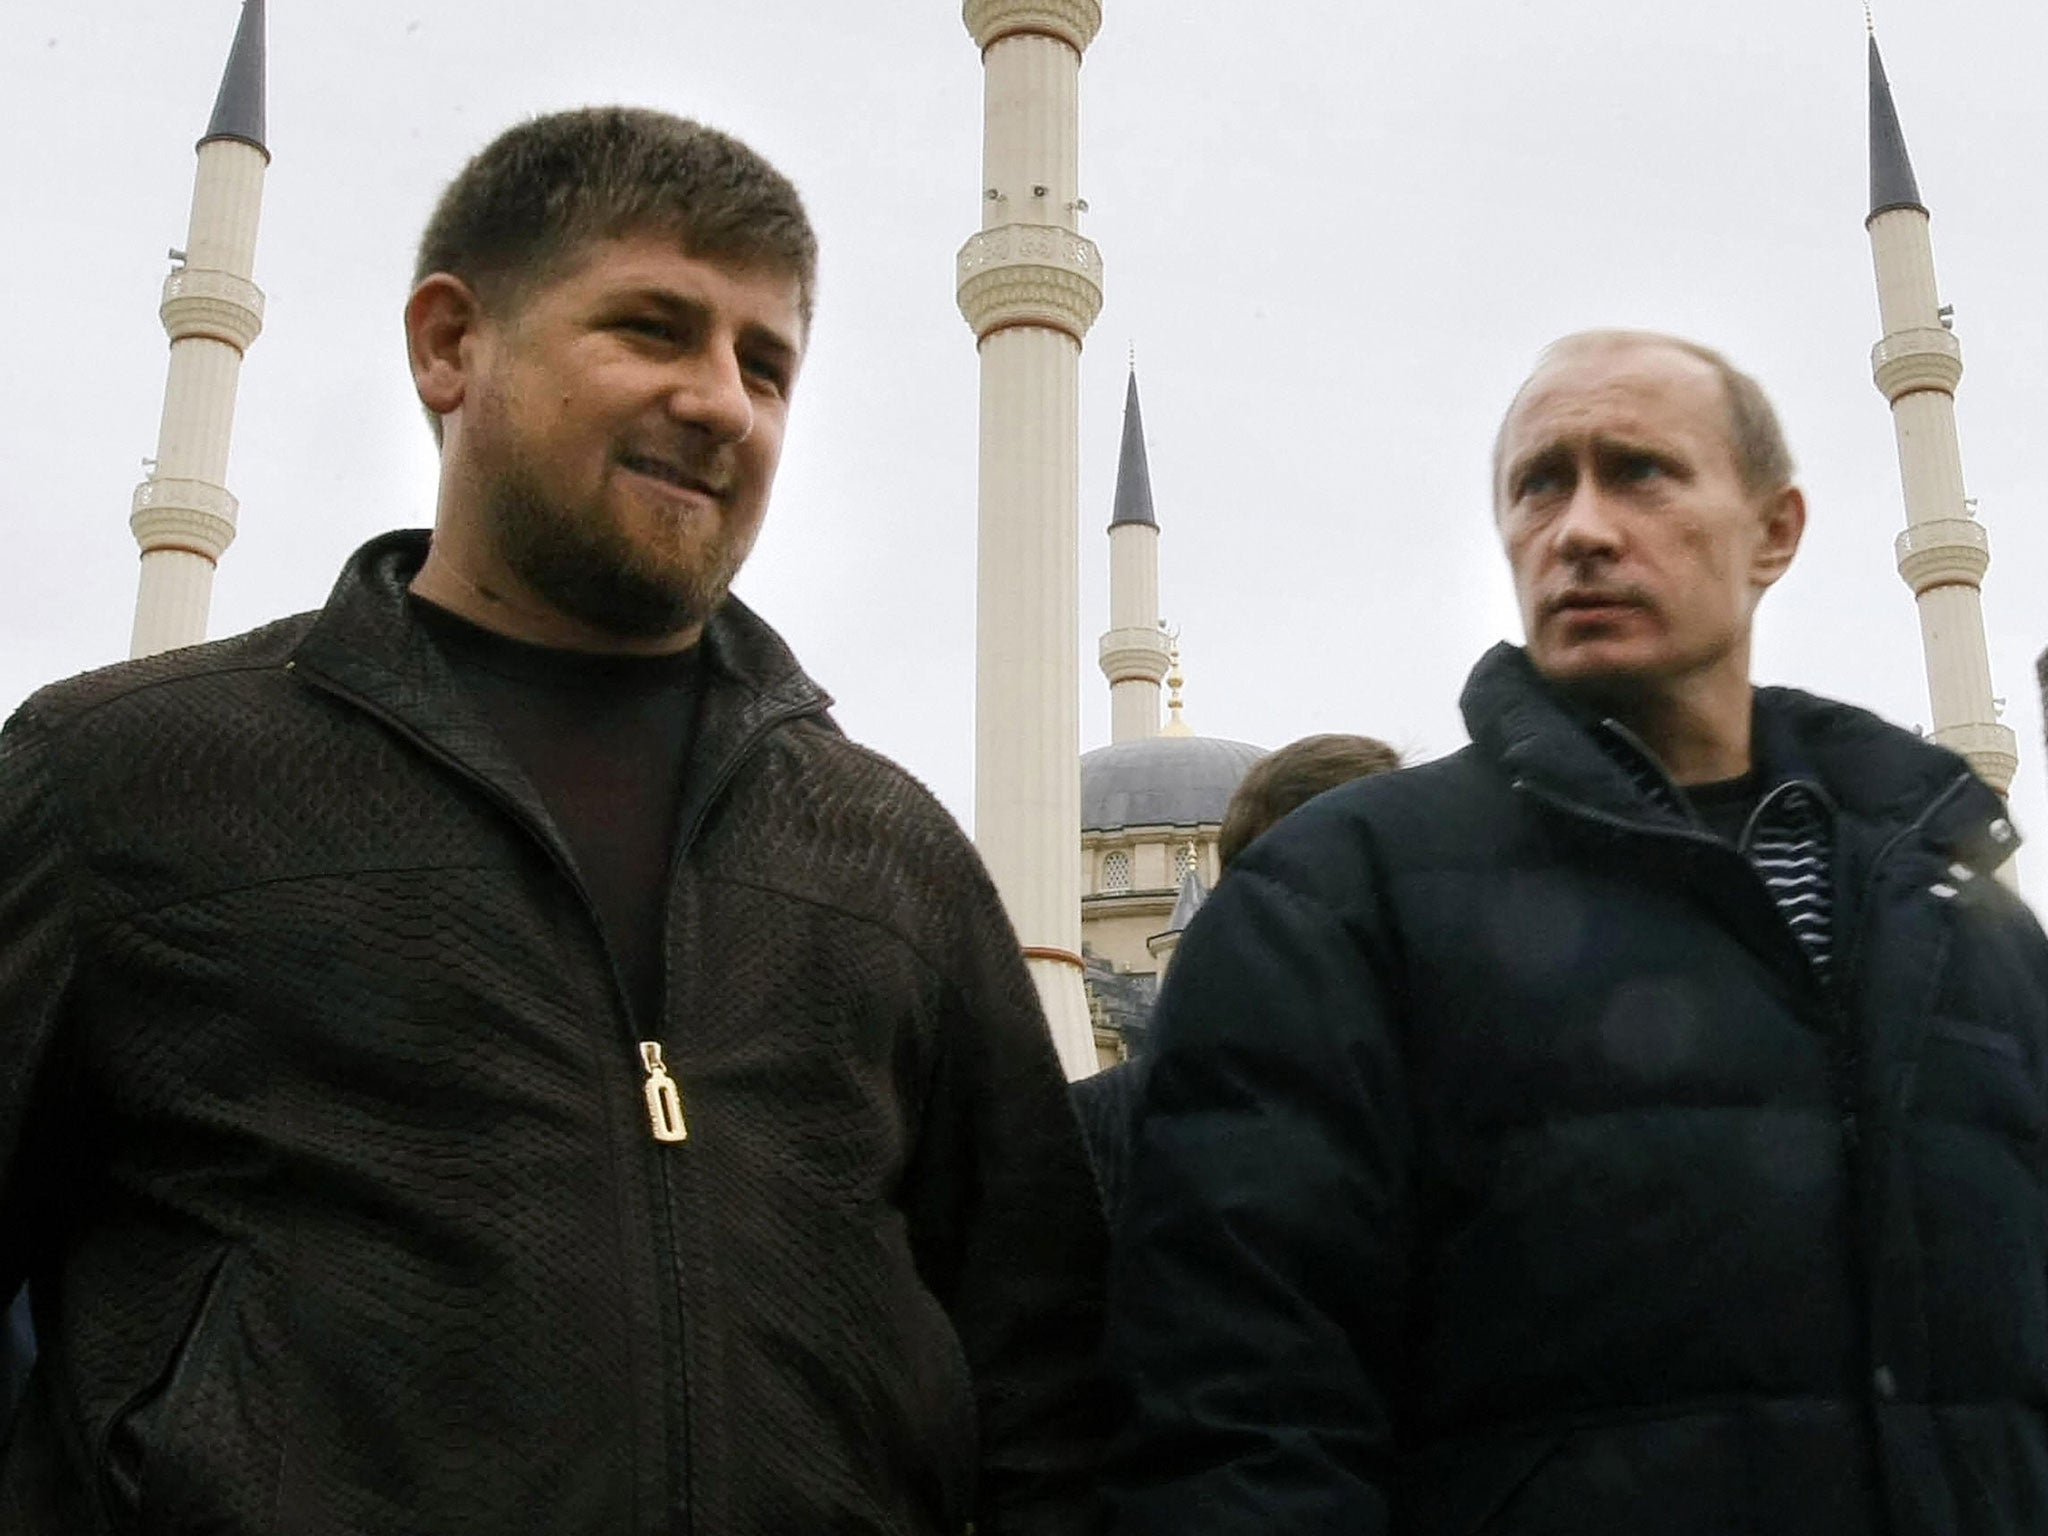 Chechen President Ramzan Kadyrov's spokesman calls report 'absolute lies and disinformation' and said gays don't exist in the Muslim-majority region